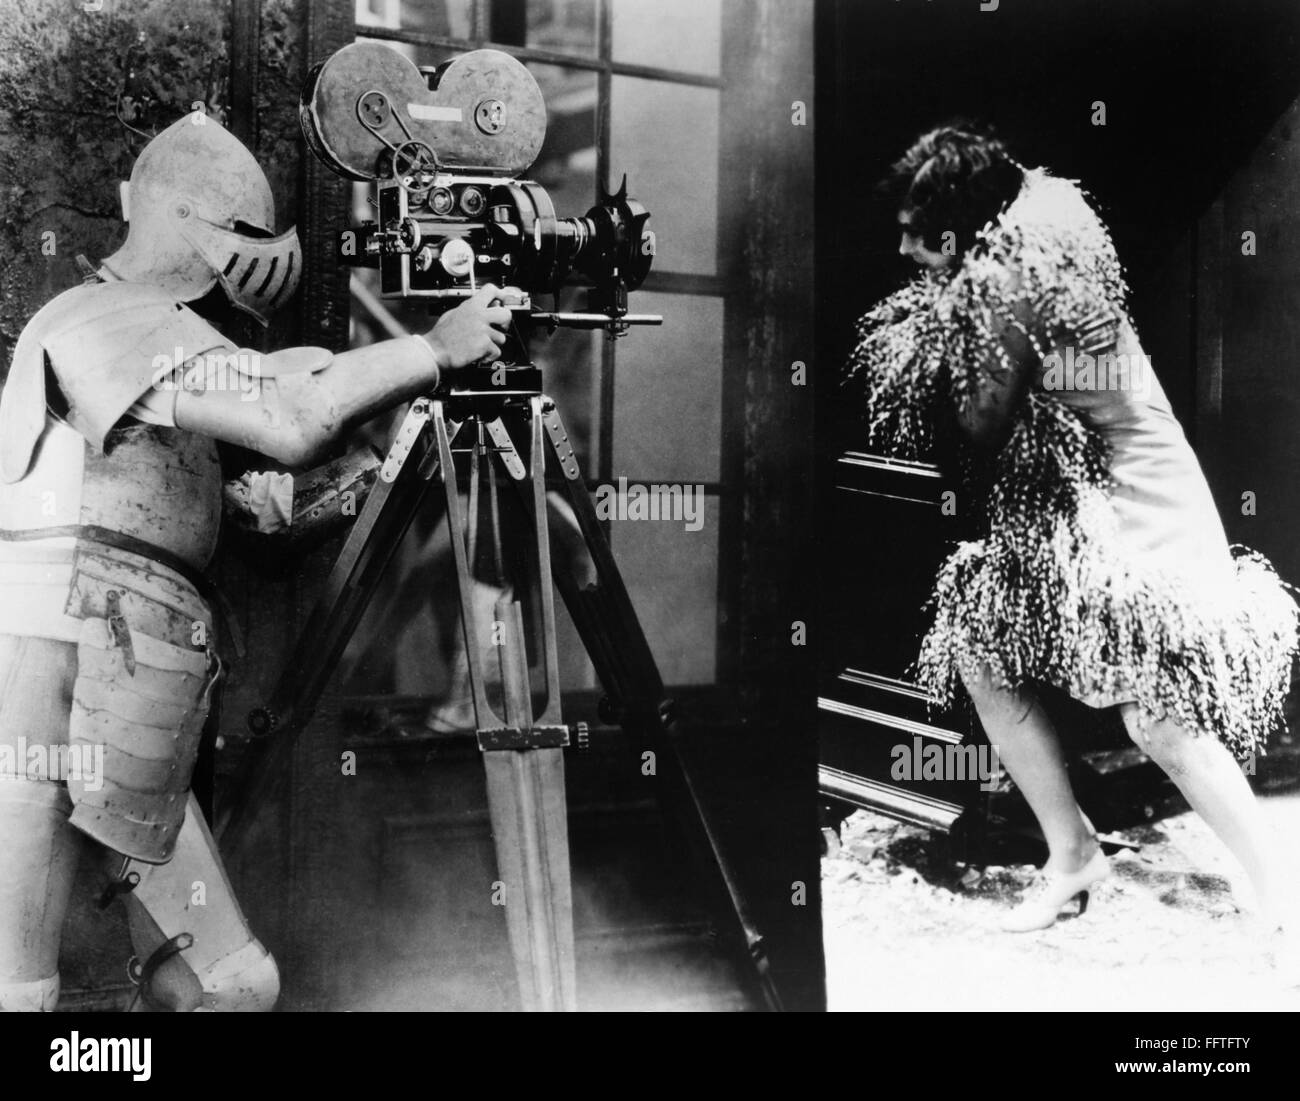 FILM: UNDERWORLD, 1927. /nFilming a scene for the gangster movie, directed by Joseph von Sternberg in 1927, the cameraman has armored himself against the blast as he films Evelyn Brent fleeing. Stock Photo